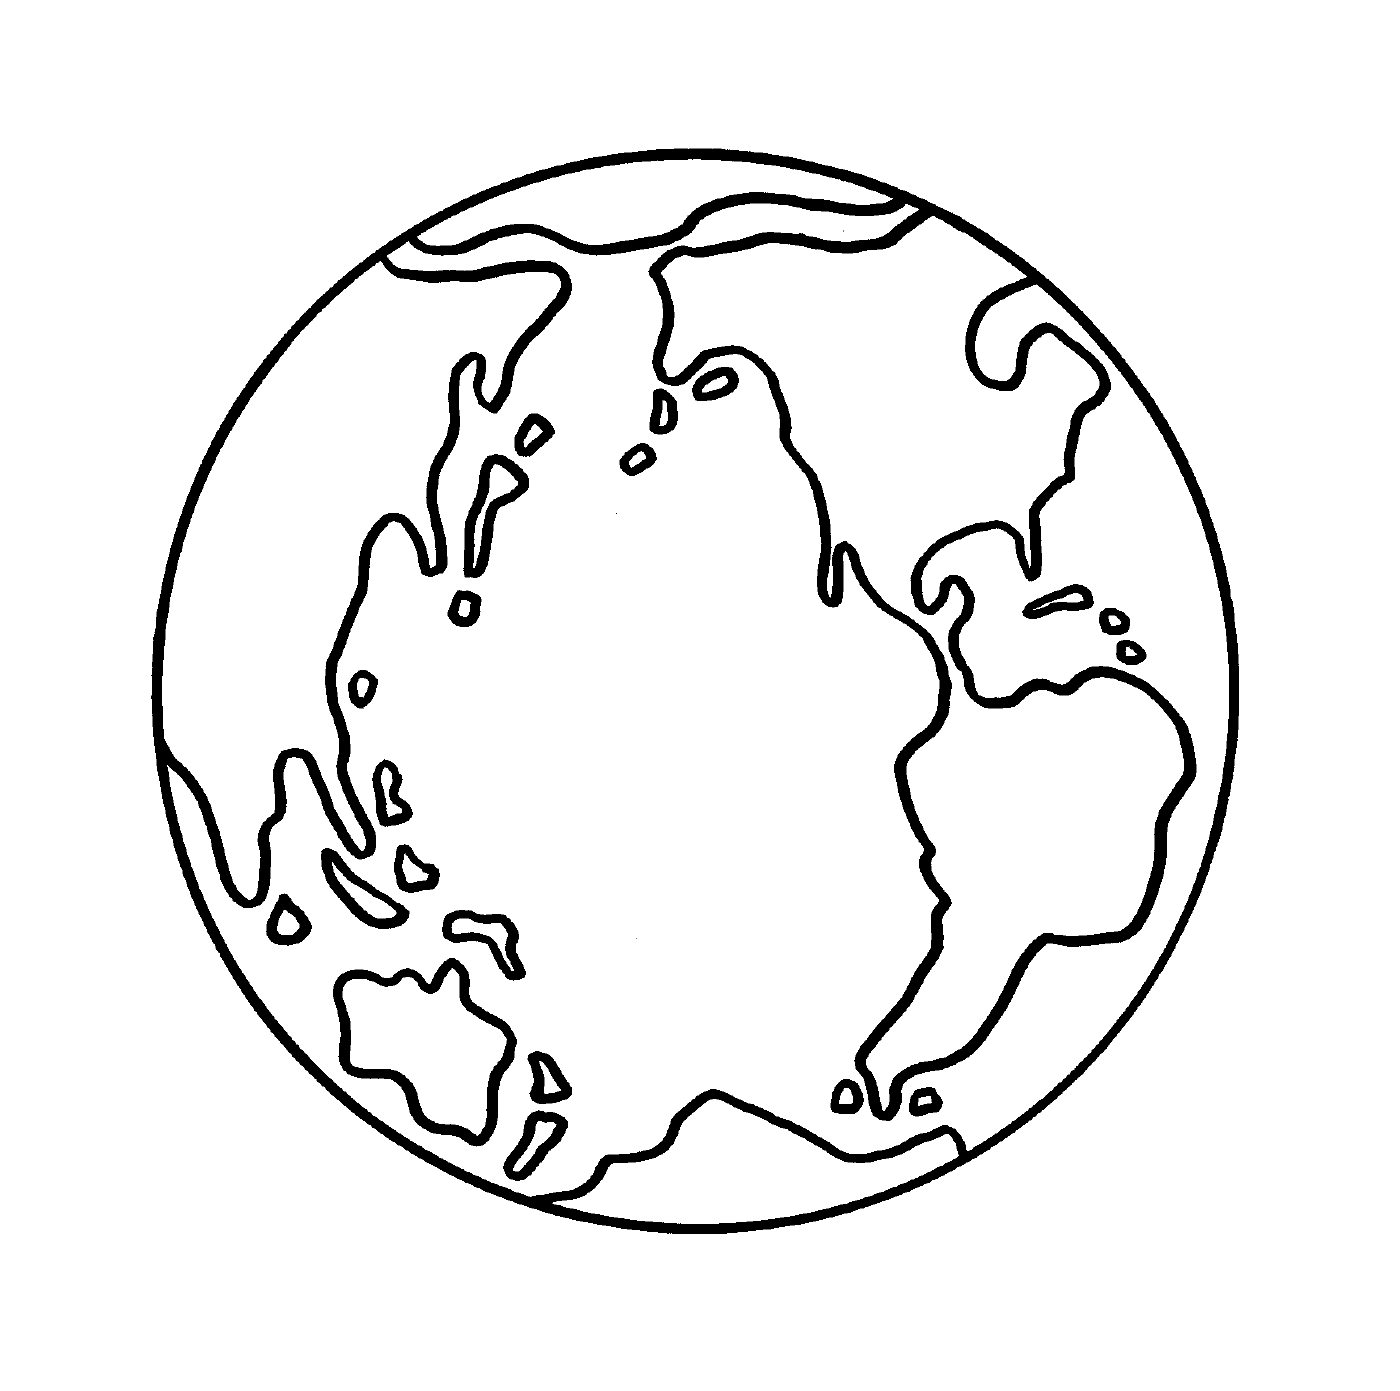  Contour of the Earth 